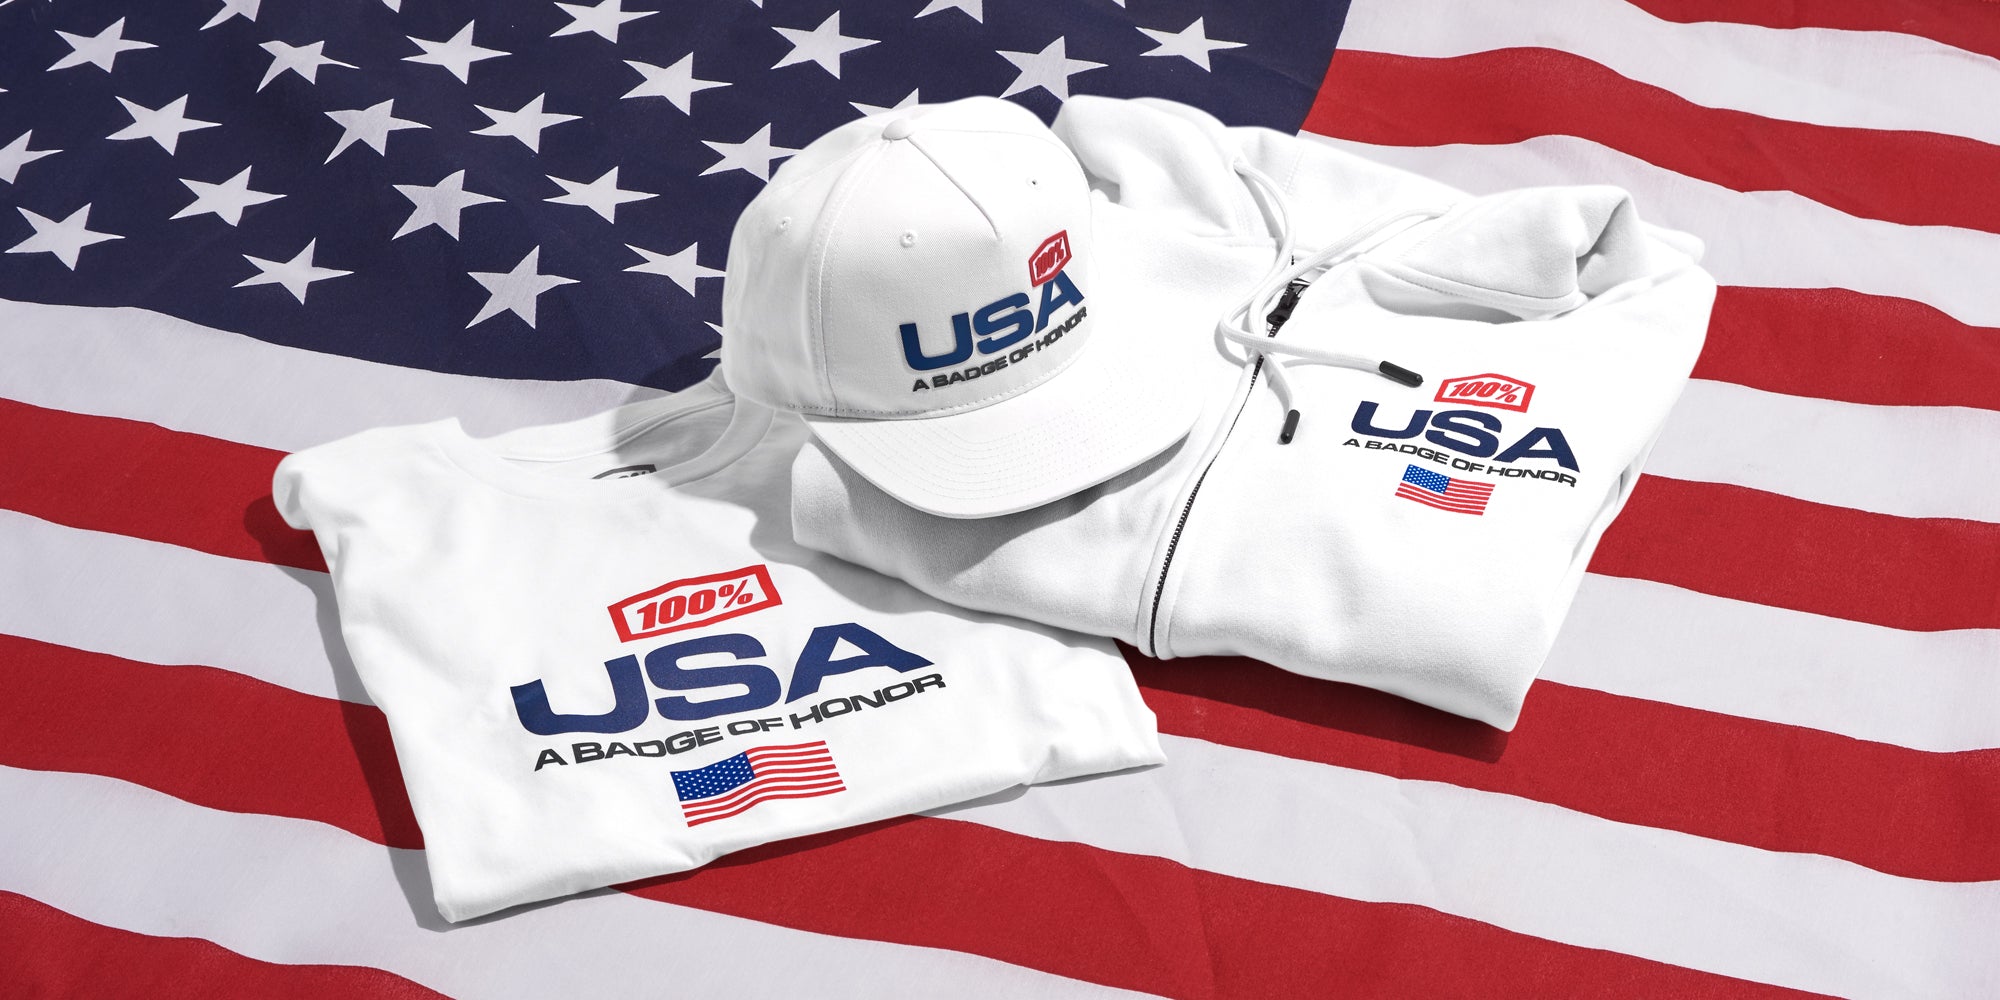 The USA Limited Edition Capsule